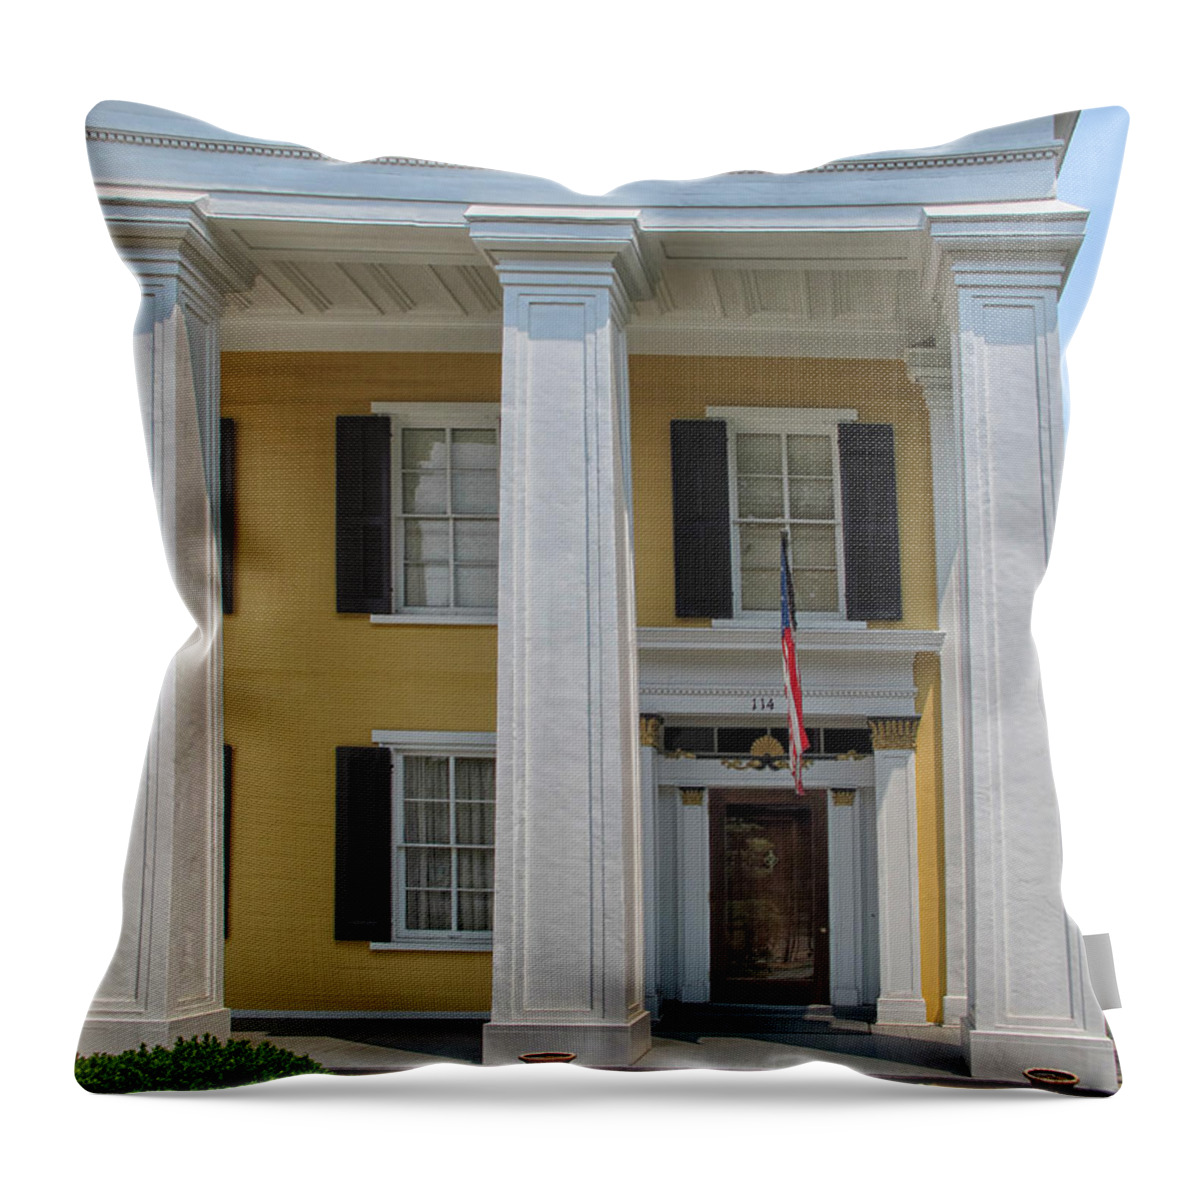 Doric House Throw Pillow featuring the photograph The Doric House by Dave Mills